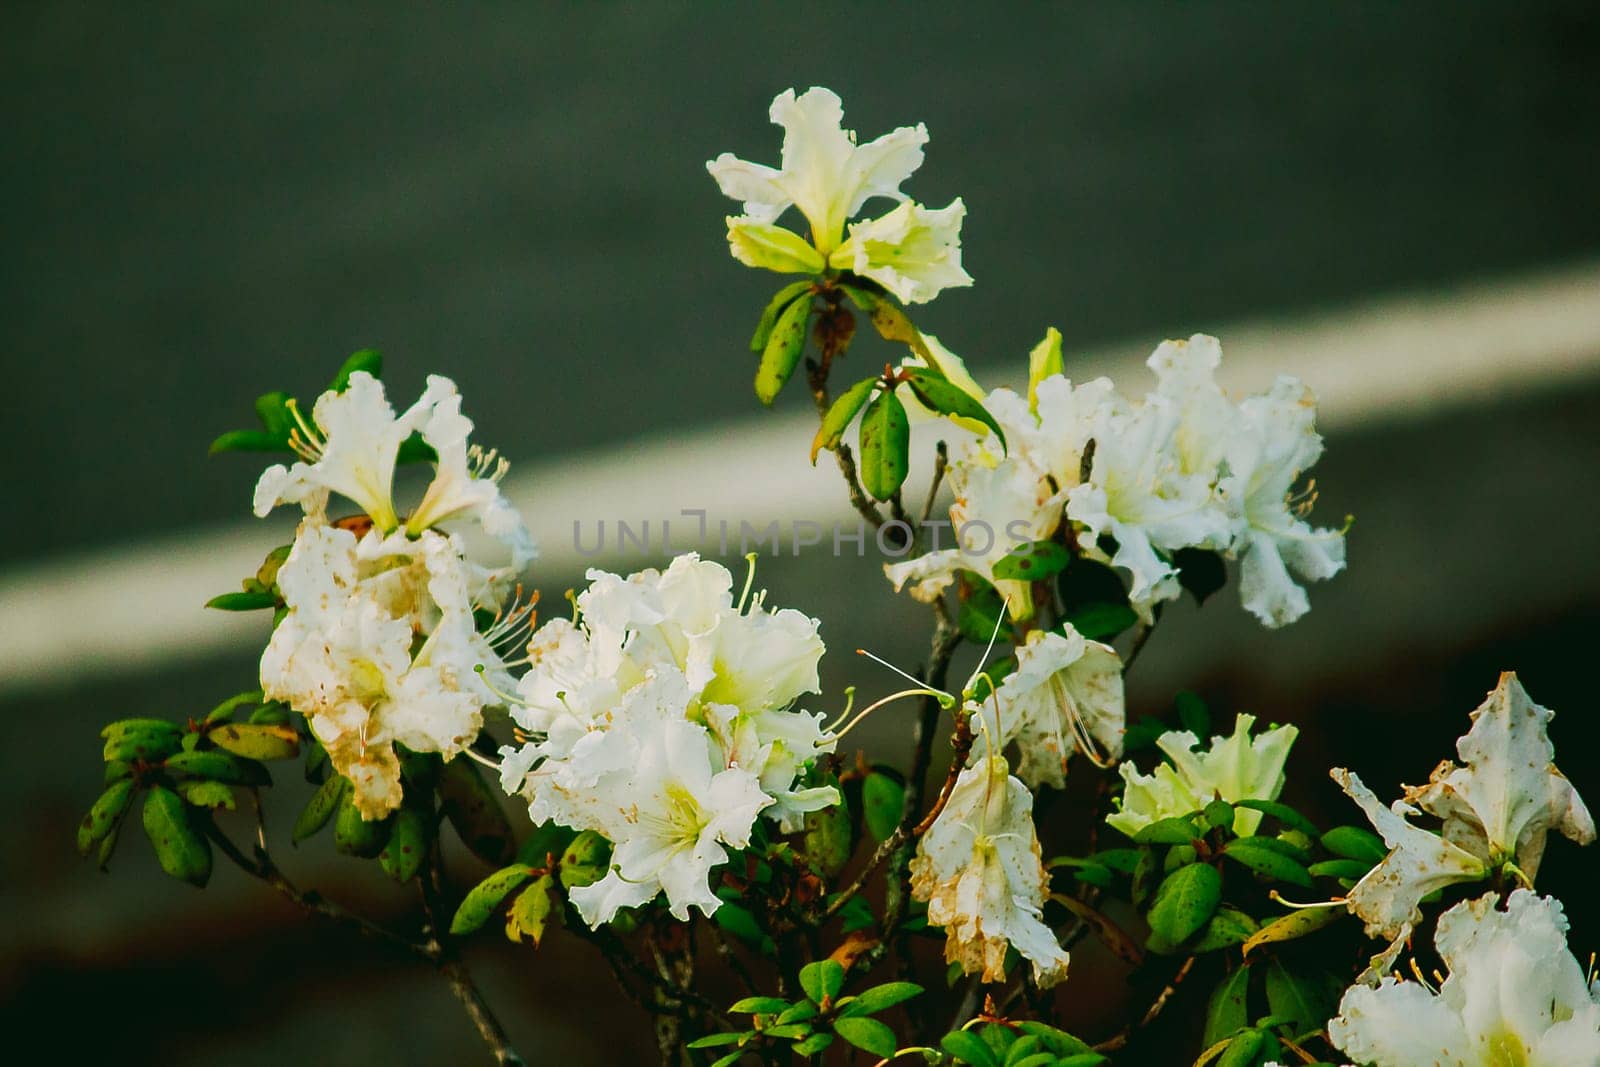 Azalea is the family name of the flowering plant in the genus Rhododendron moulmainense in Doi Inthanon National Park.